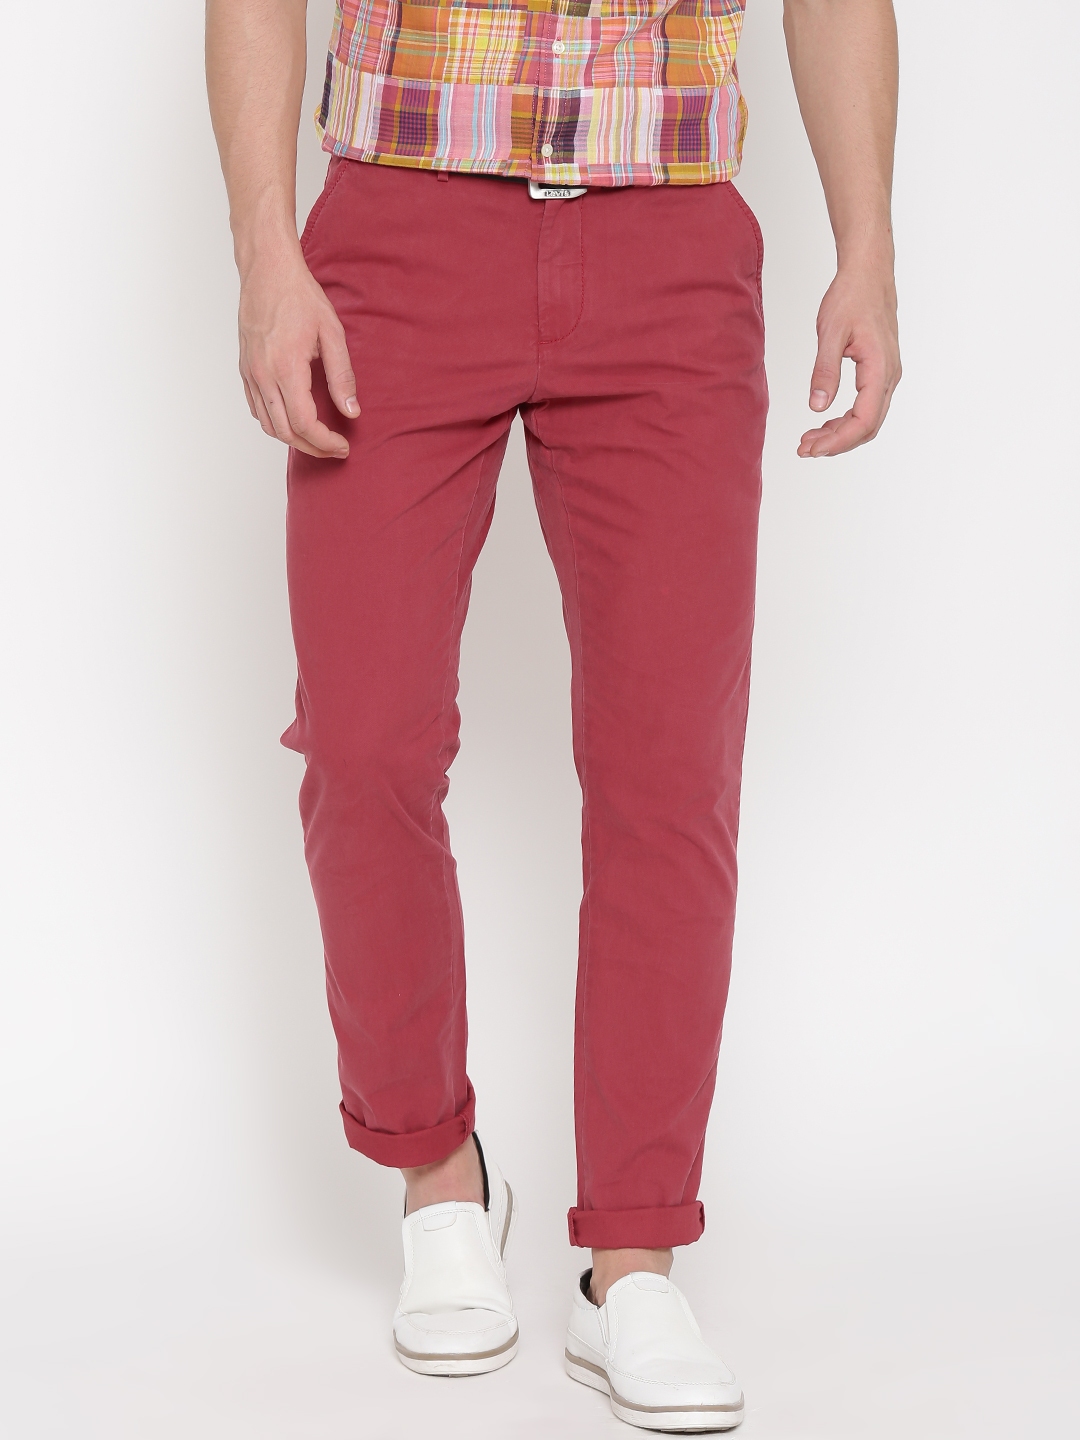 Mens Wine Red Cotton Slim Fit Casual Chinos Trousers Stretch  Urbano  Fashion